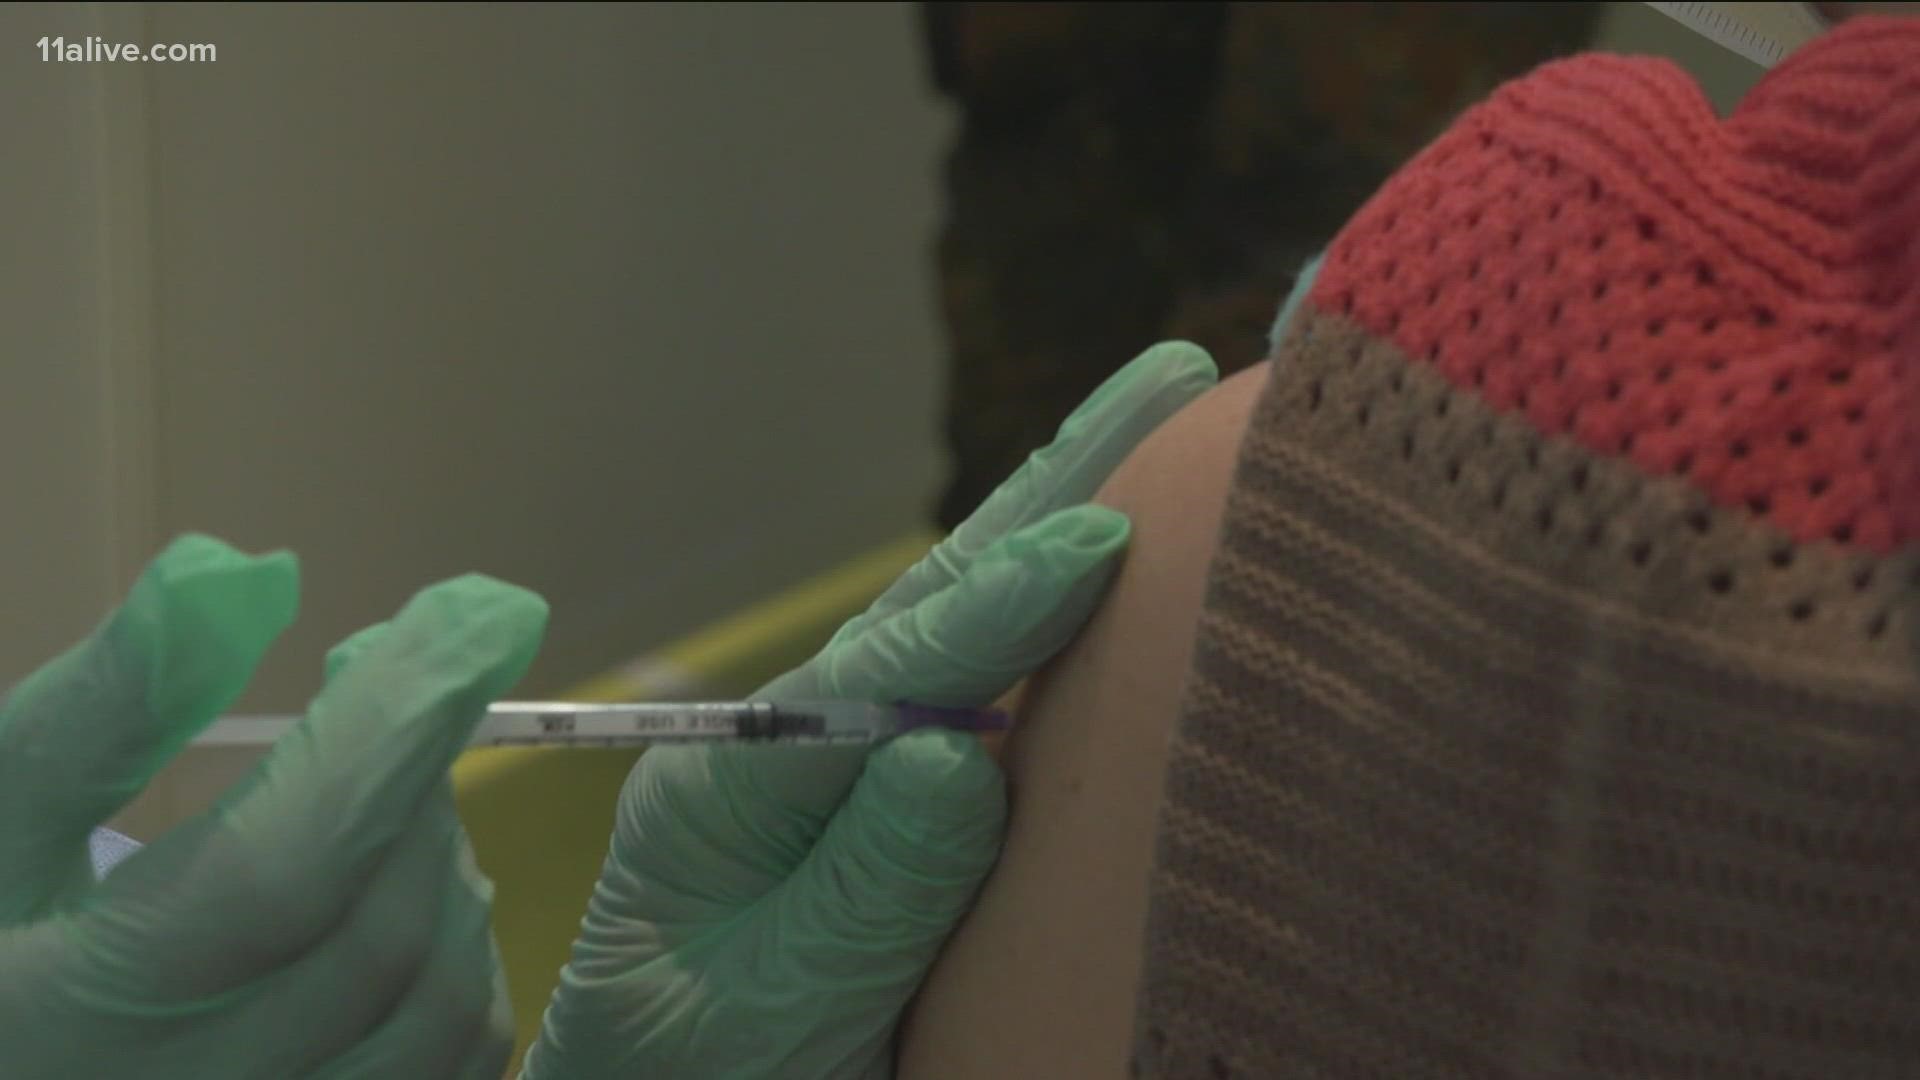 A growing number of vaccinated Georgians who have not gotten their booster shot are getting COVID.